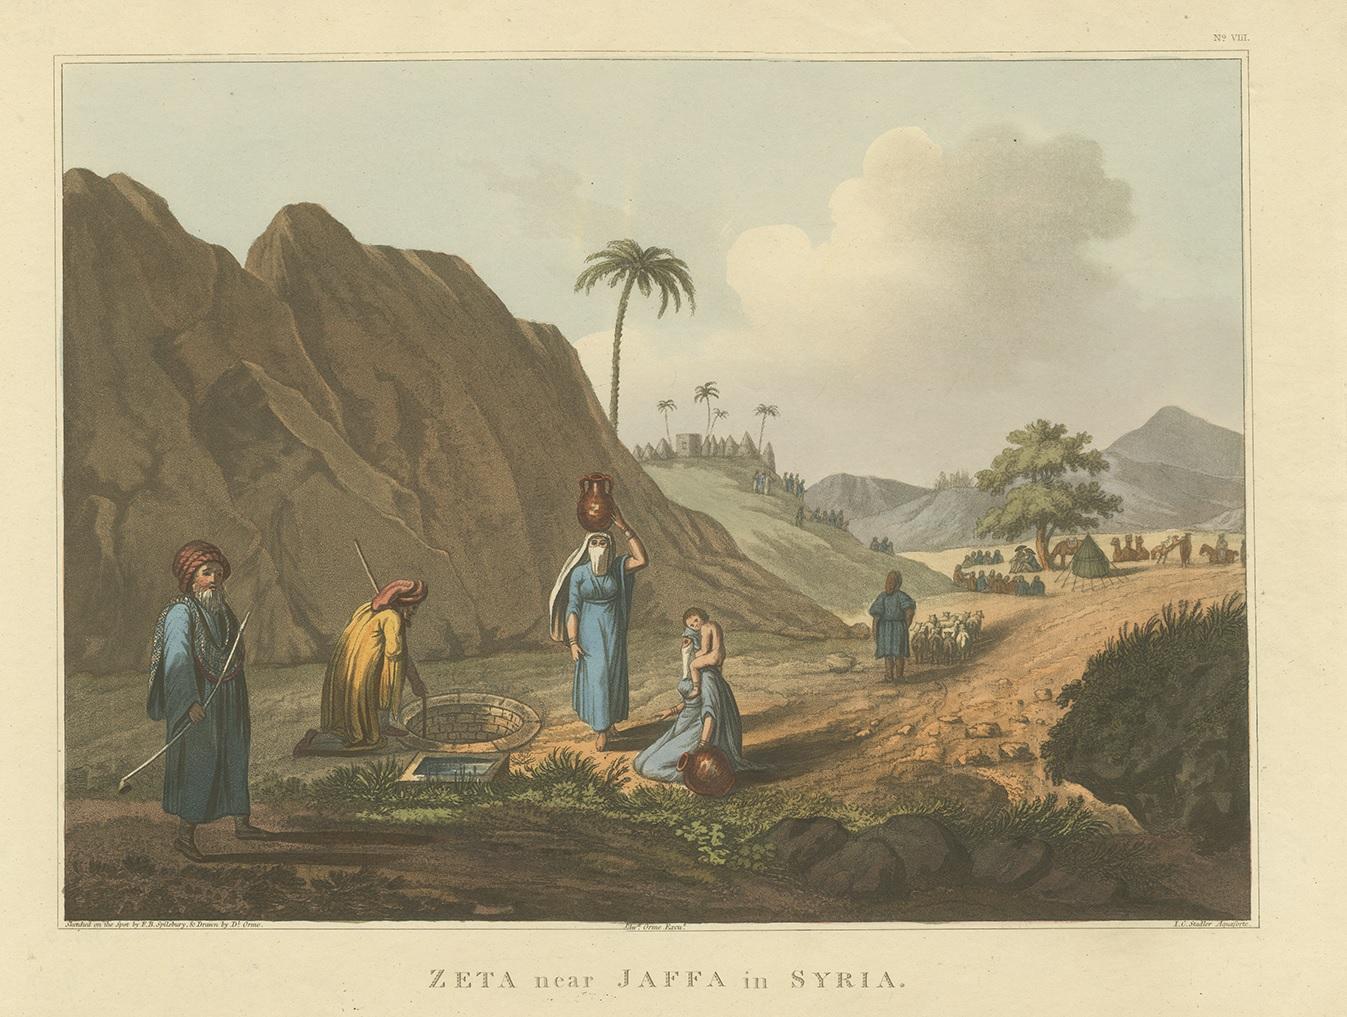 Antique aquatint titled 'Zeta near Jaffa in Syria. A scene near a well in Syria, a man draws water from the well while one woman carries a jug on her head, another woman kneels with a child clinging to her. Sketched on the spot by F.B. Spilsbury.